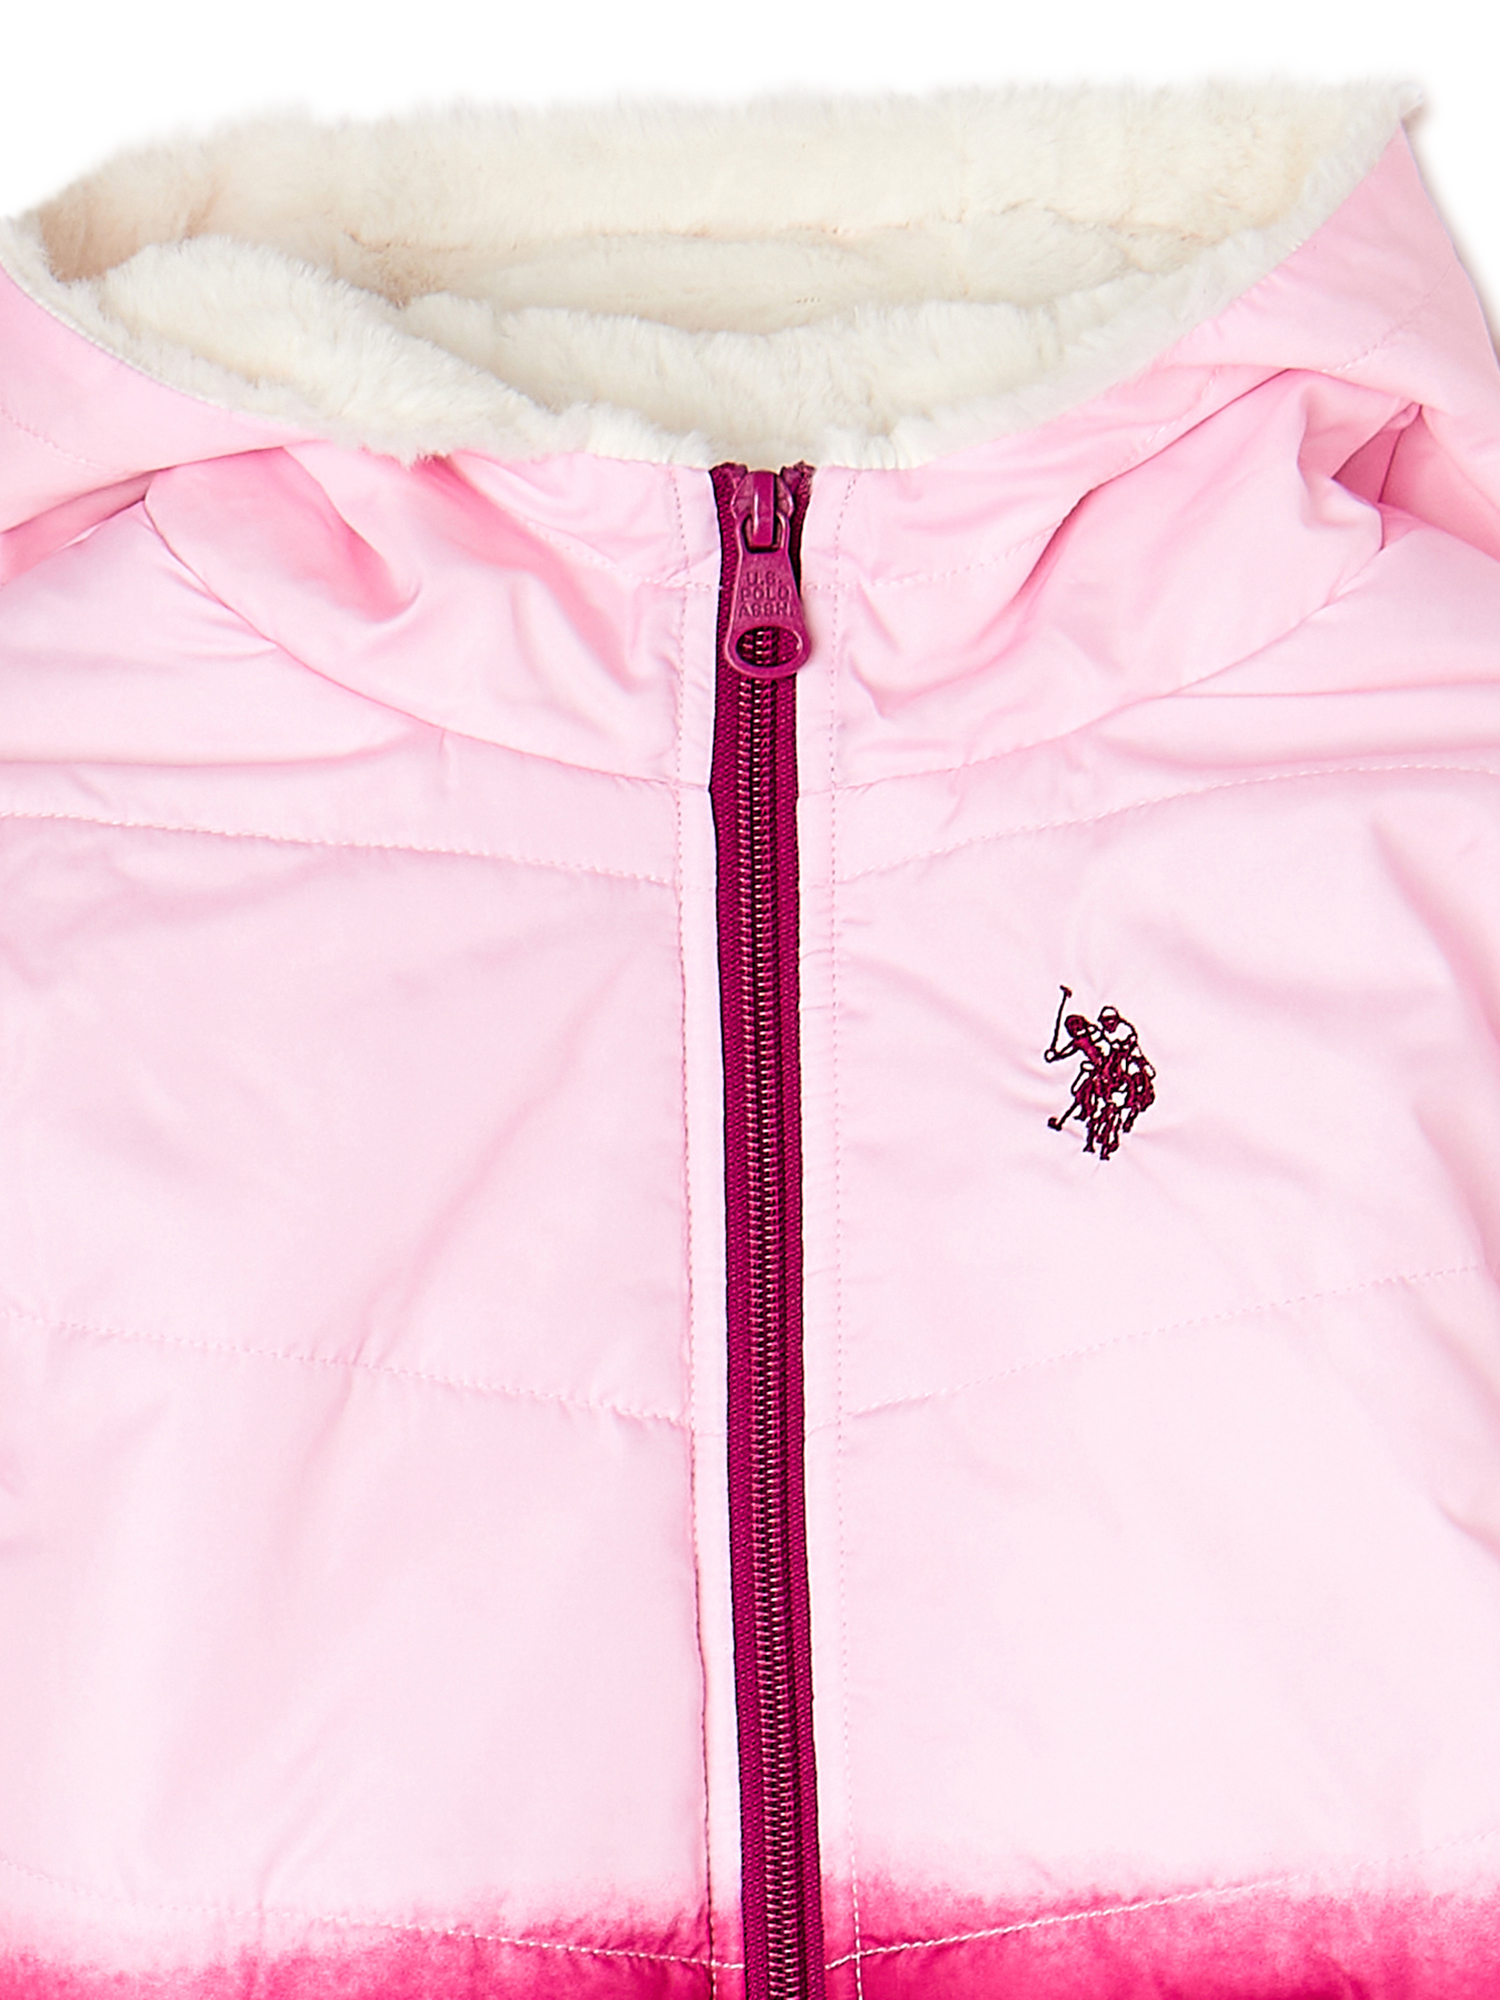 U.S. Polo Assn. Girls’ Dip-Dye Hooded Puffer Jacket with Faux Fur Lining, Sizes 4-16 - image 3 of 3